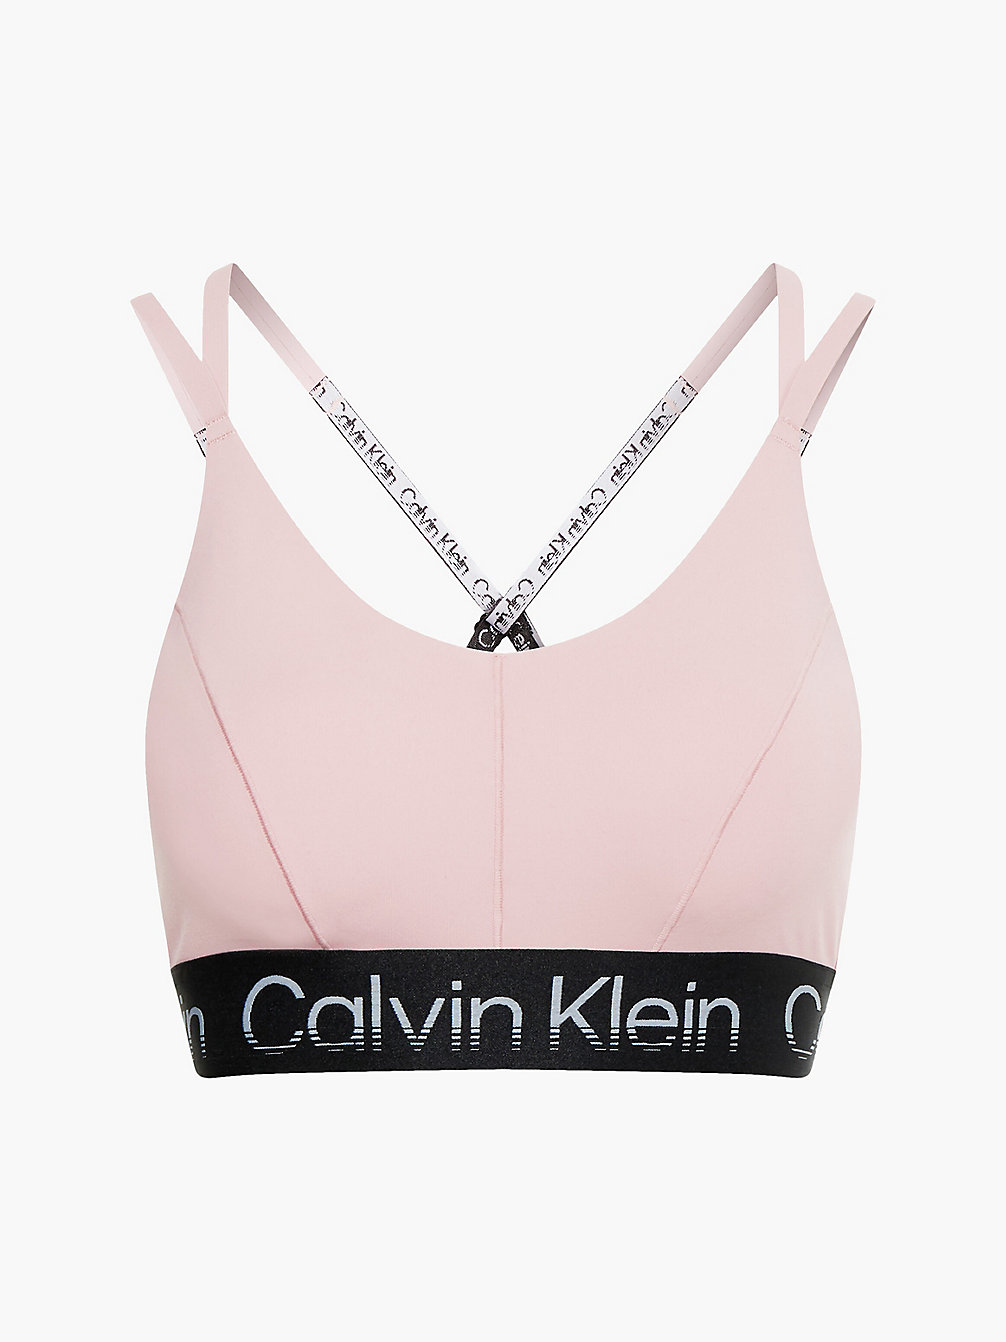 SILVER PINK Recycled High Impact Sports Bra undefined women Calvin Klein